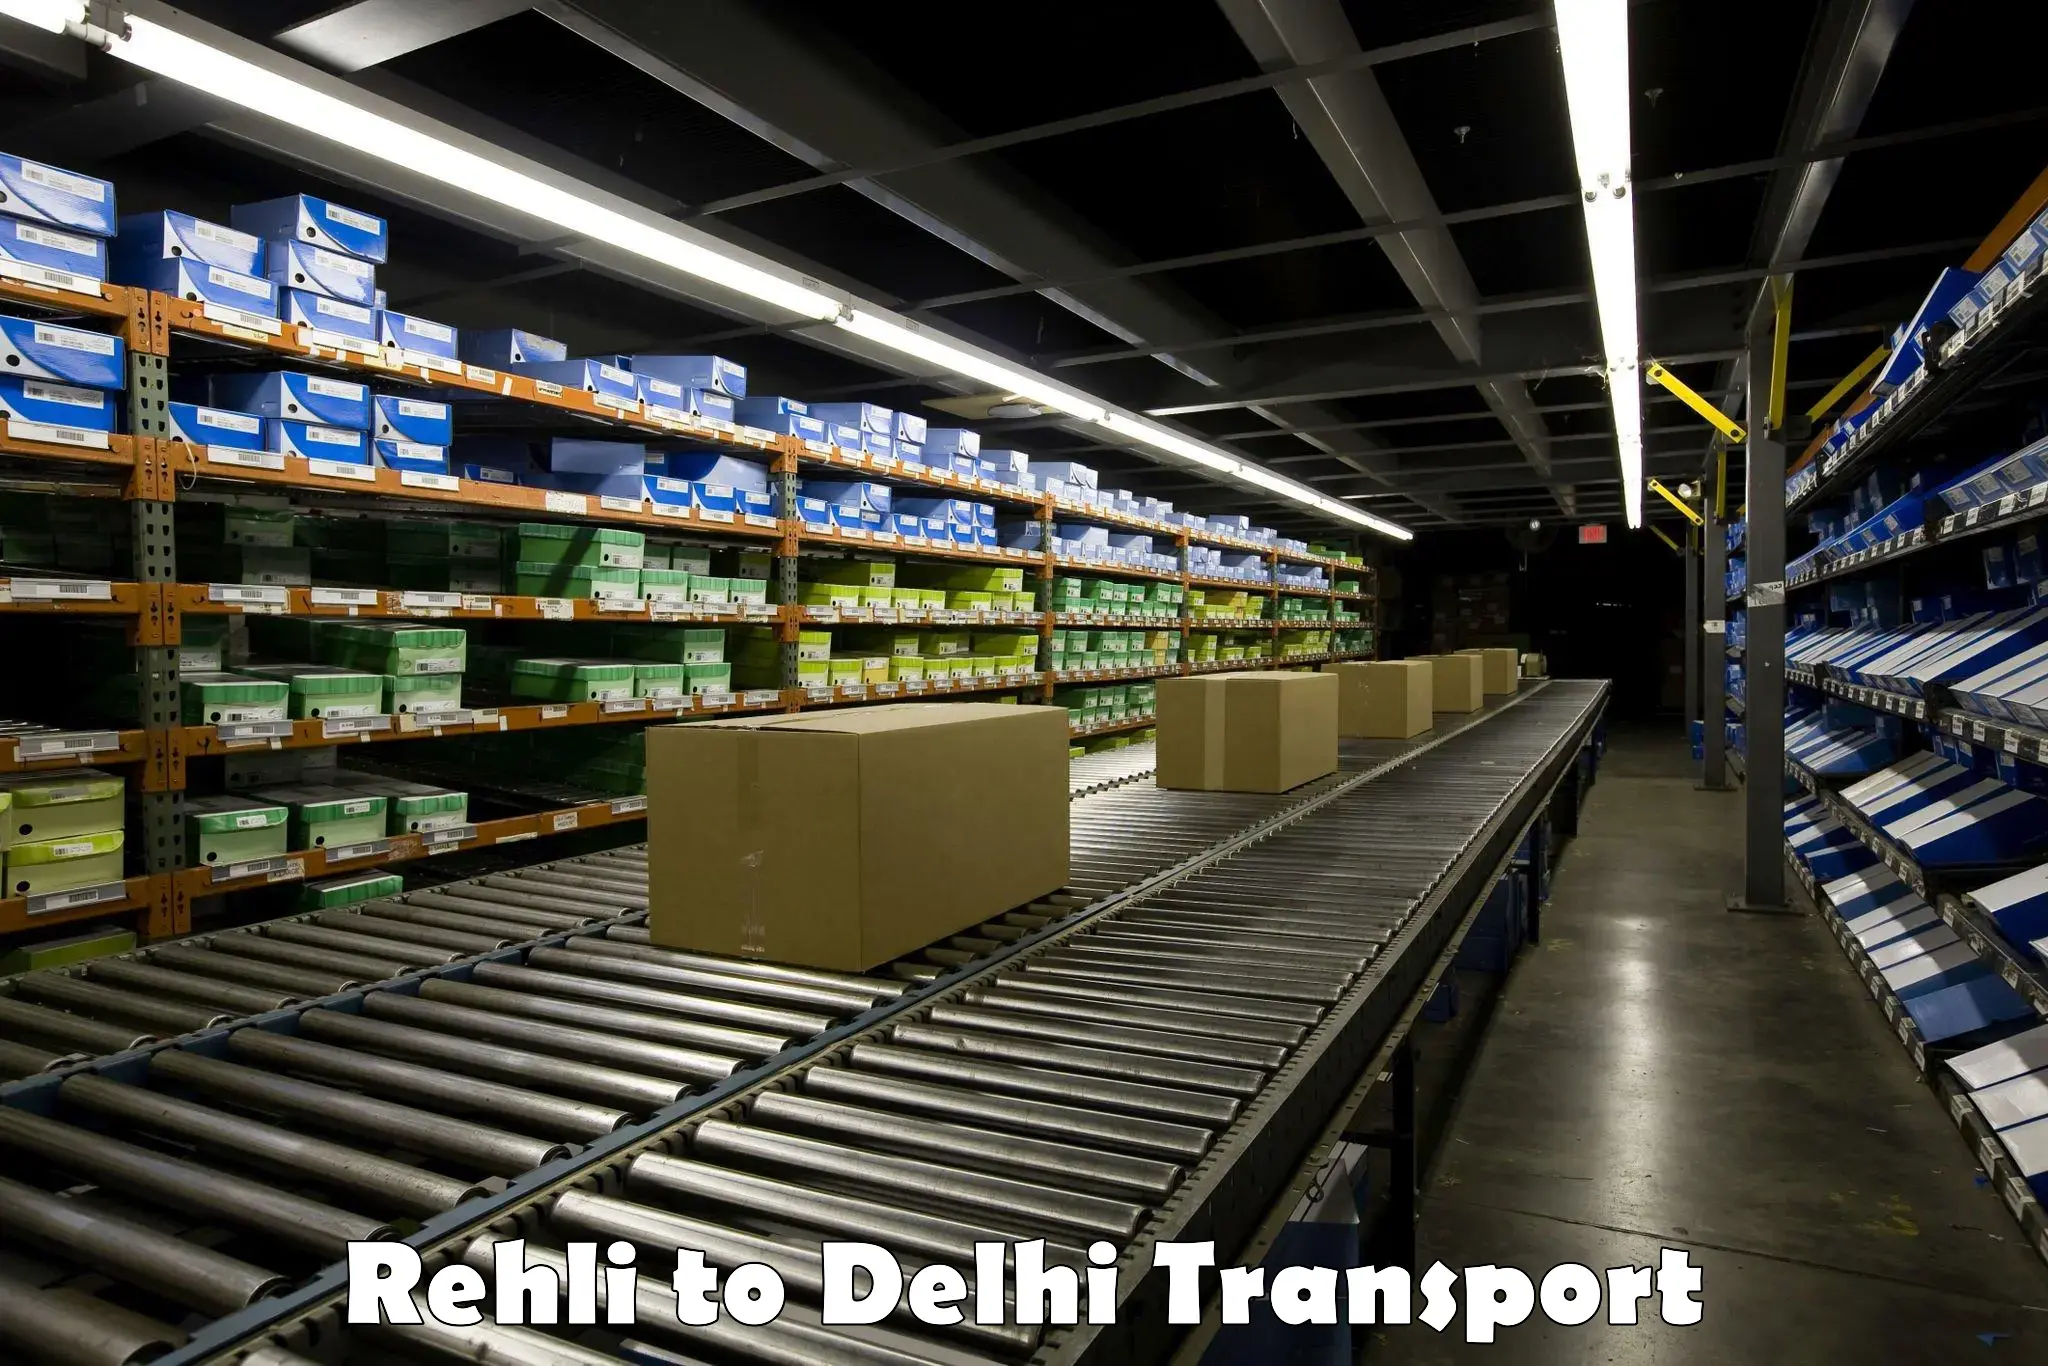 Daily transport service in Rehli to East Delhi